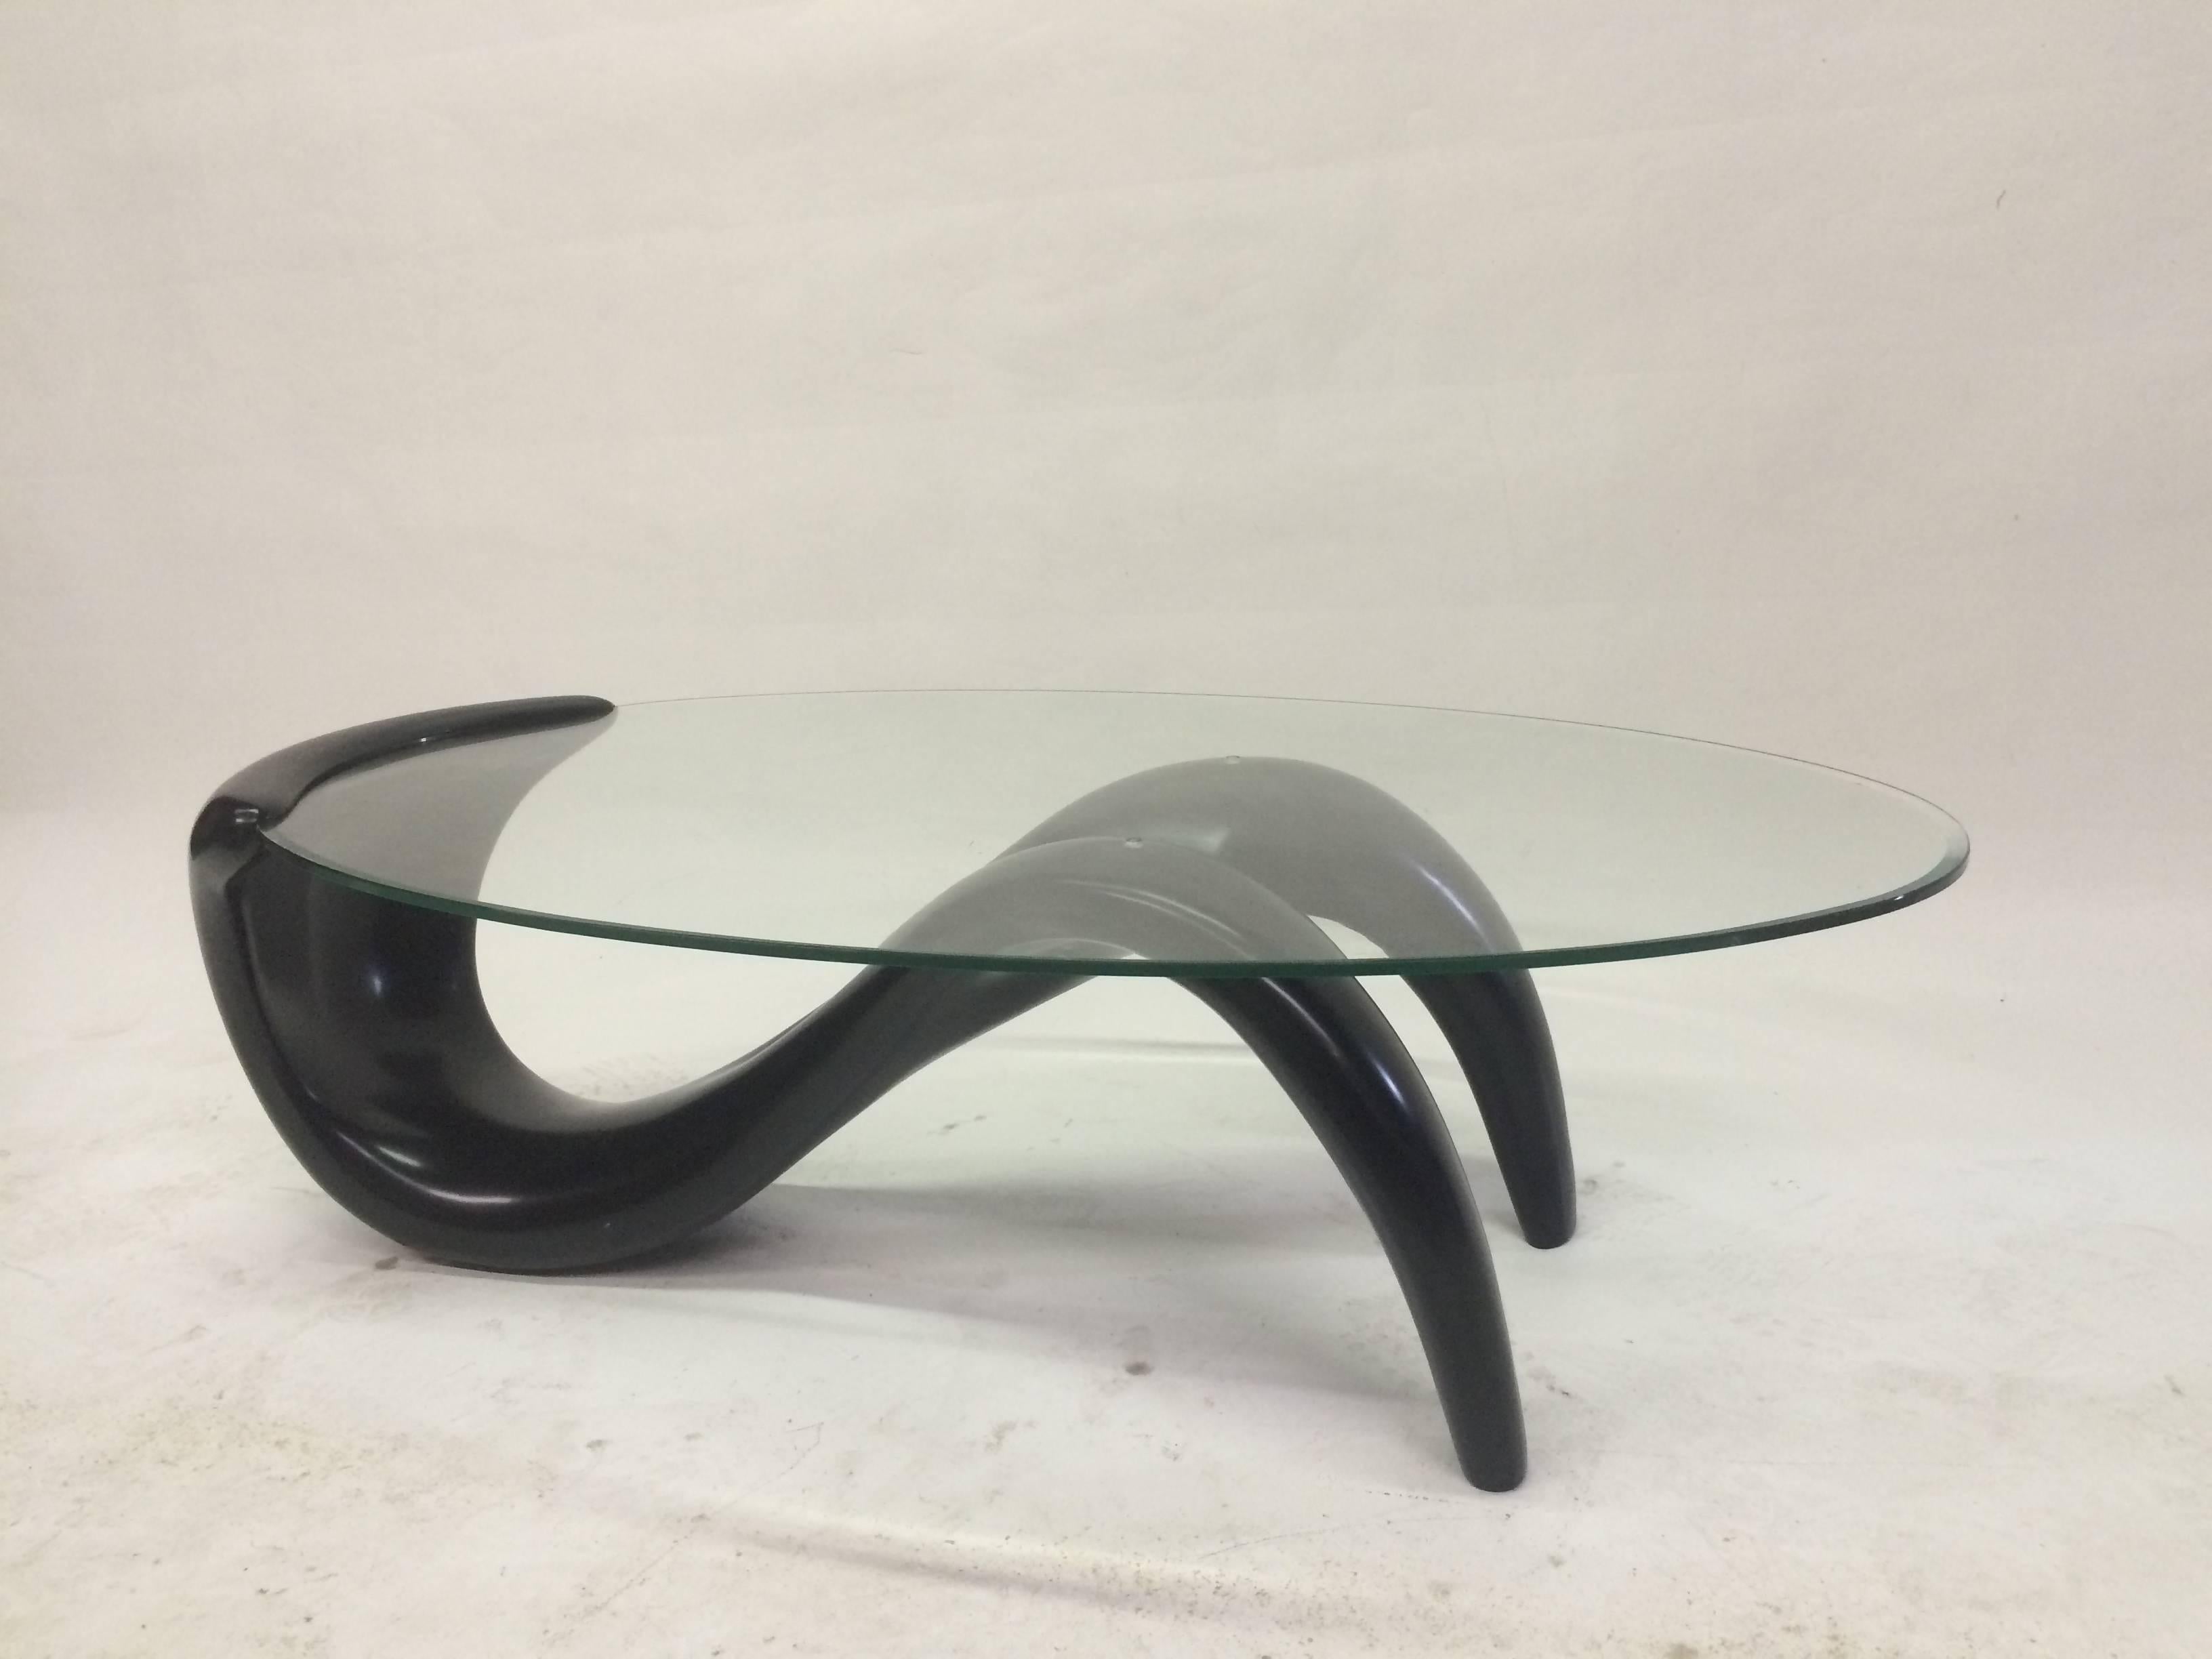  This biomorphic coffee table from the 1980s features an undulating black lacquer finish fiberglass base which hugs the glass surface on one end while supporting it from beneath towards the other end.